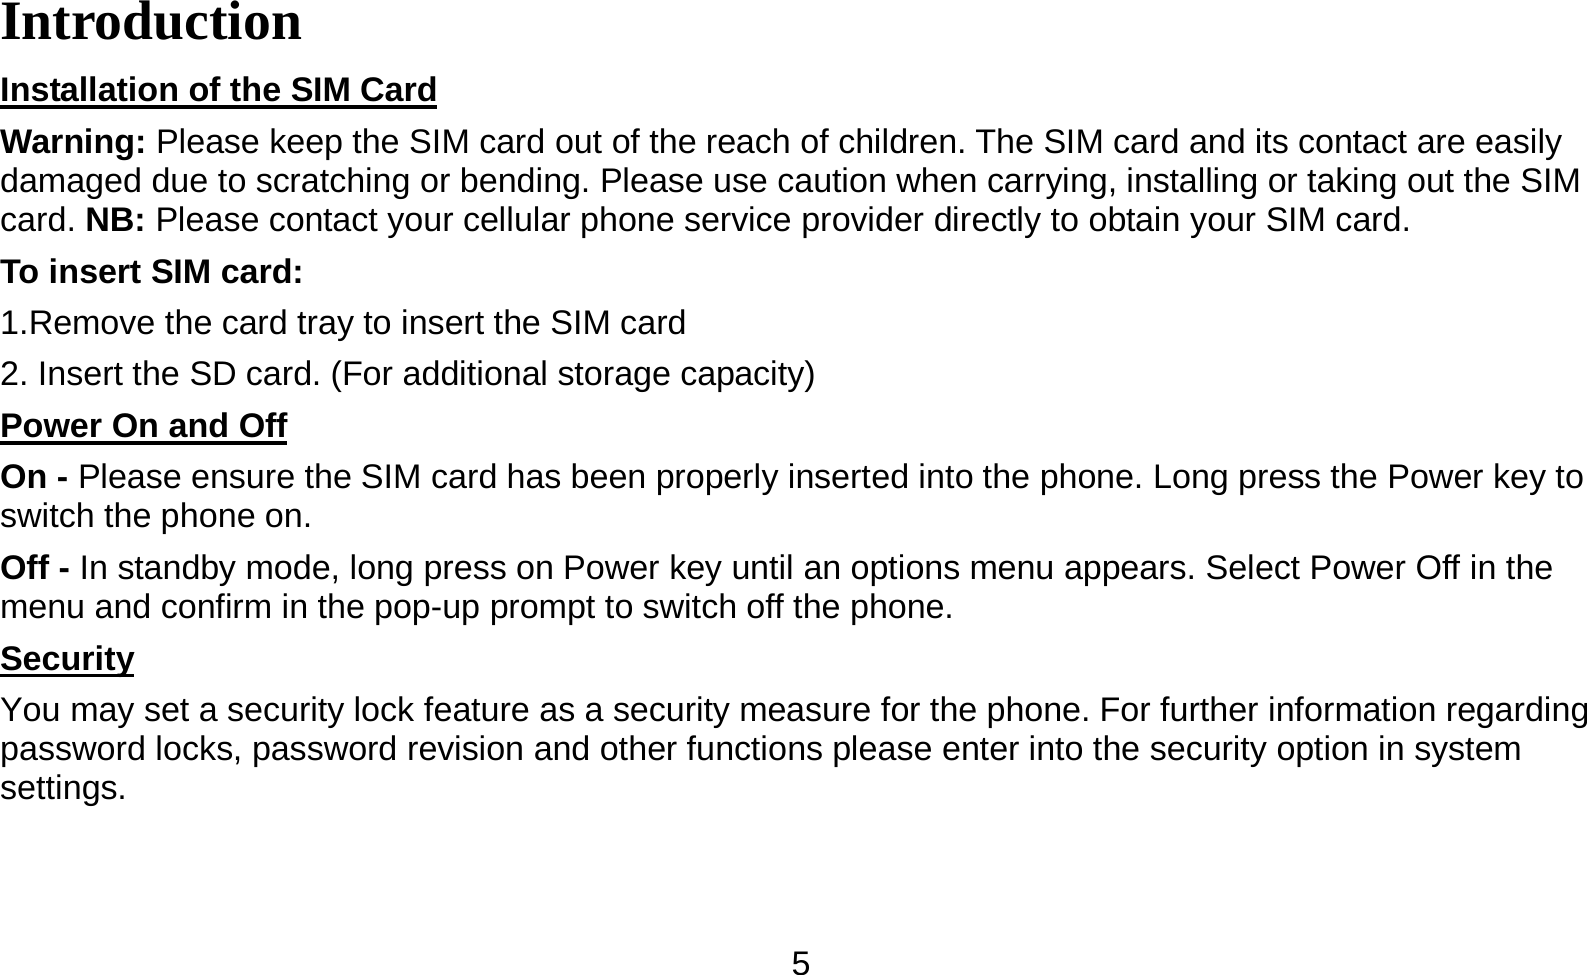   5Introduction Installation of the SIM Card                                                                         Warning: Please keep the SIM card out of the reach of children. The SIM card and its contact are easily damaged due to scratching or bending. Please use caution when carrying, installing or taking out the SIM card. NB: Please contact your cellular phone service provider directly to obtain your SIM card. To insert SIM card: 1.Remove the card tray to insert the SIM card   2. Insert the SD card. (For additional storage capacity) Power On and Off                                                                                  On - Please ensure the SIM card has been properly inserted into the phone. Long press the Power key to switch the phone on. Off - In standby mode, long press on Power key until an options menu appears. Select Power Off in the menu and confirm in the pop-up prompt to switch off the phone. Security                                                                                           You may set a security lock feature as a security measure for the phone. For further information regarding password locks, password revision and other functions please enter into the security option in system settings. 